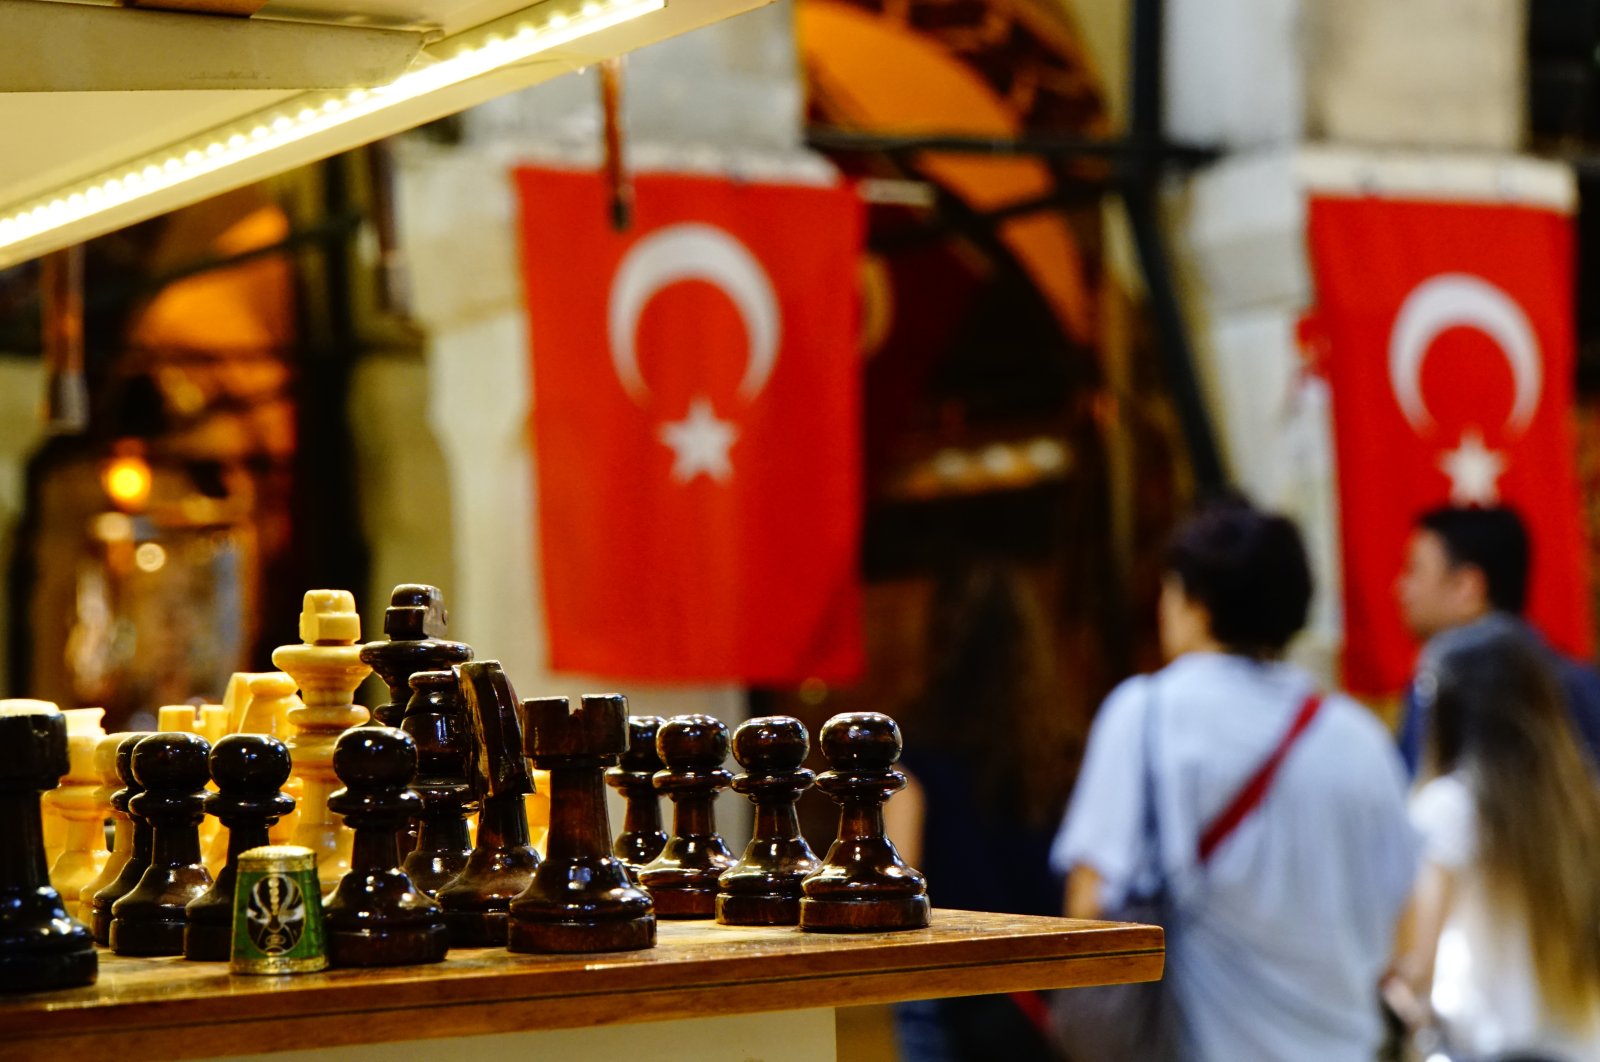 A chessboard is seen in front of Turkish flags hanging in the background. (Getty Images Photo)